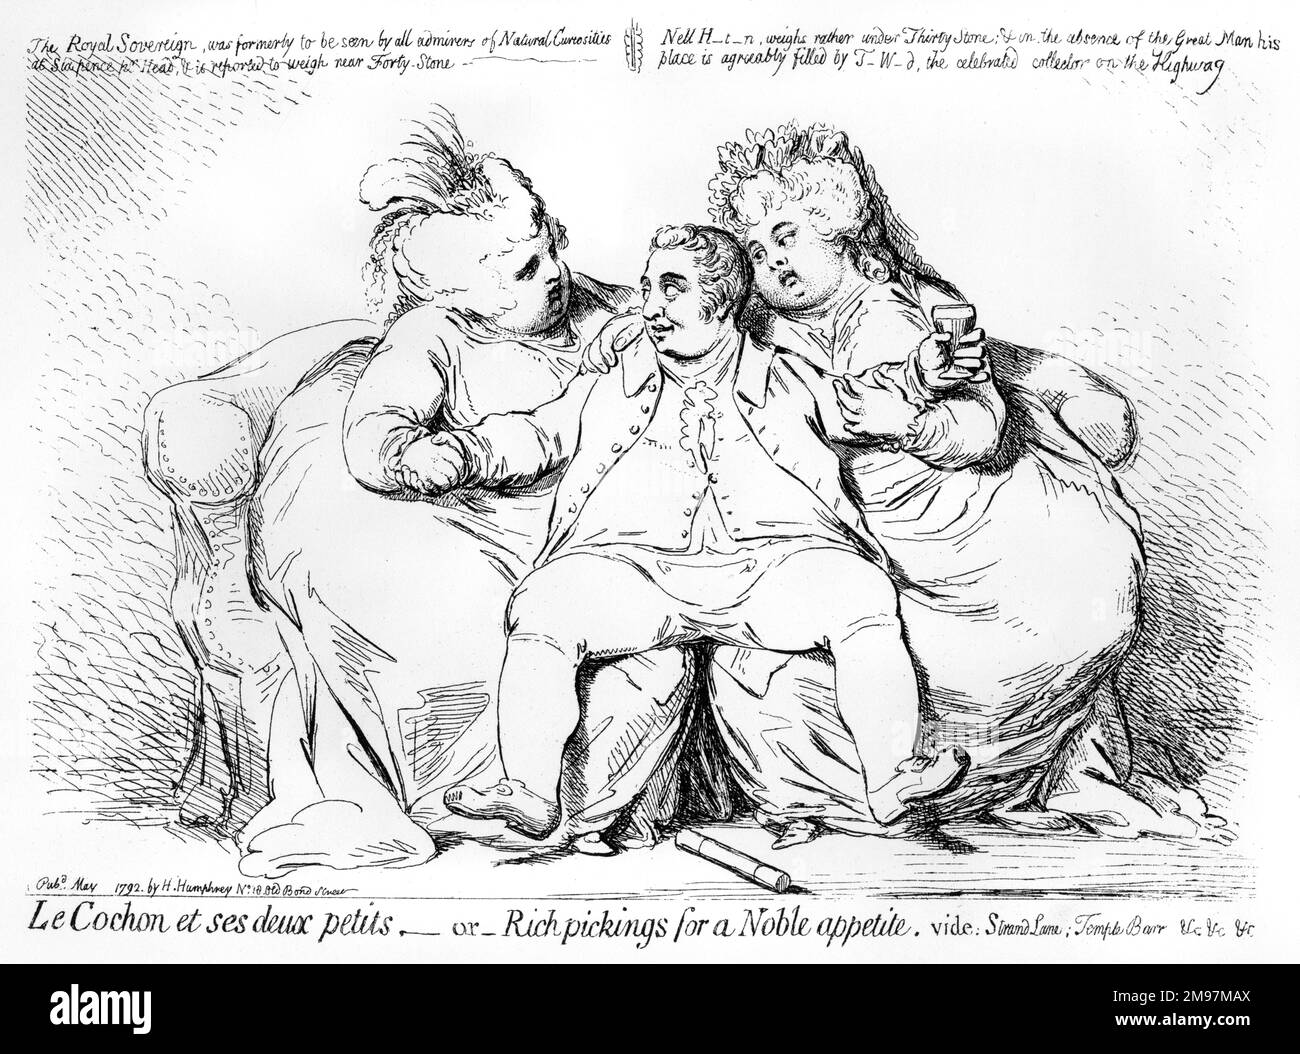 Cartoon, Le Cochon et ses deux petits, or Rich pickings for a Noble appetite, vide Strand Lane, Temple Barr &c &c &c, by James Gillray.  Showing Charles Howard, 11th Duke of Norfolk, and two large lady-friends. Stock Photo